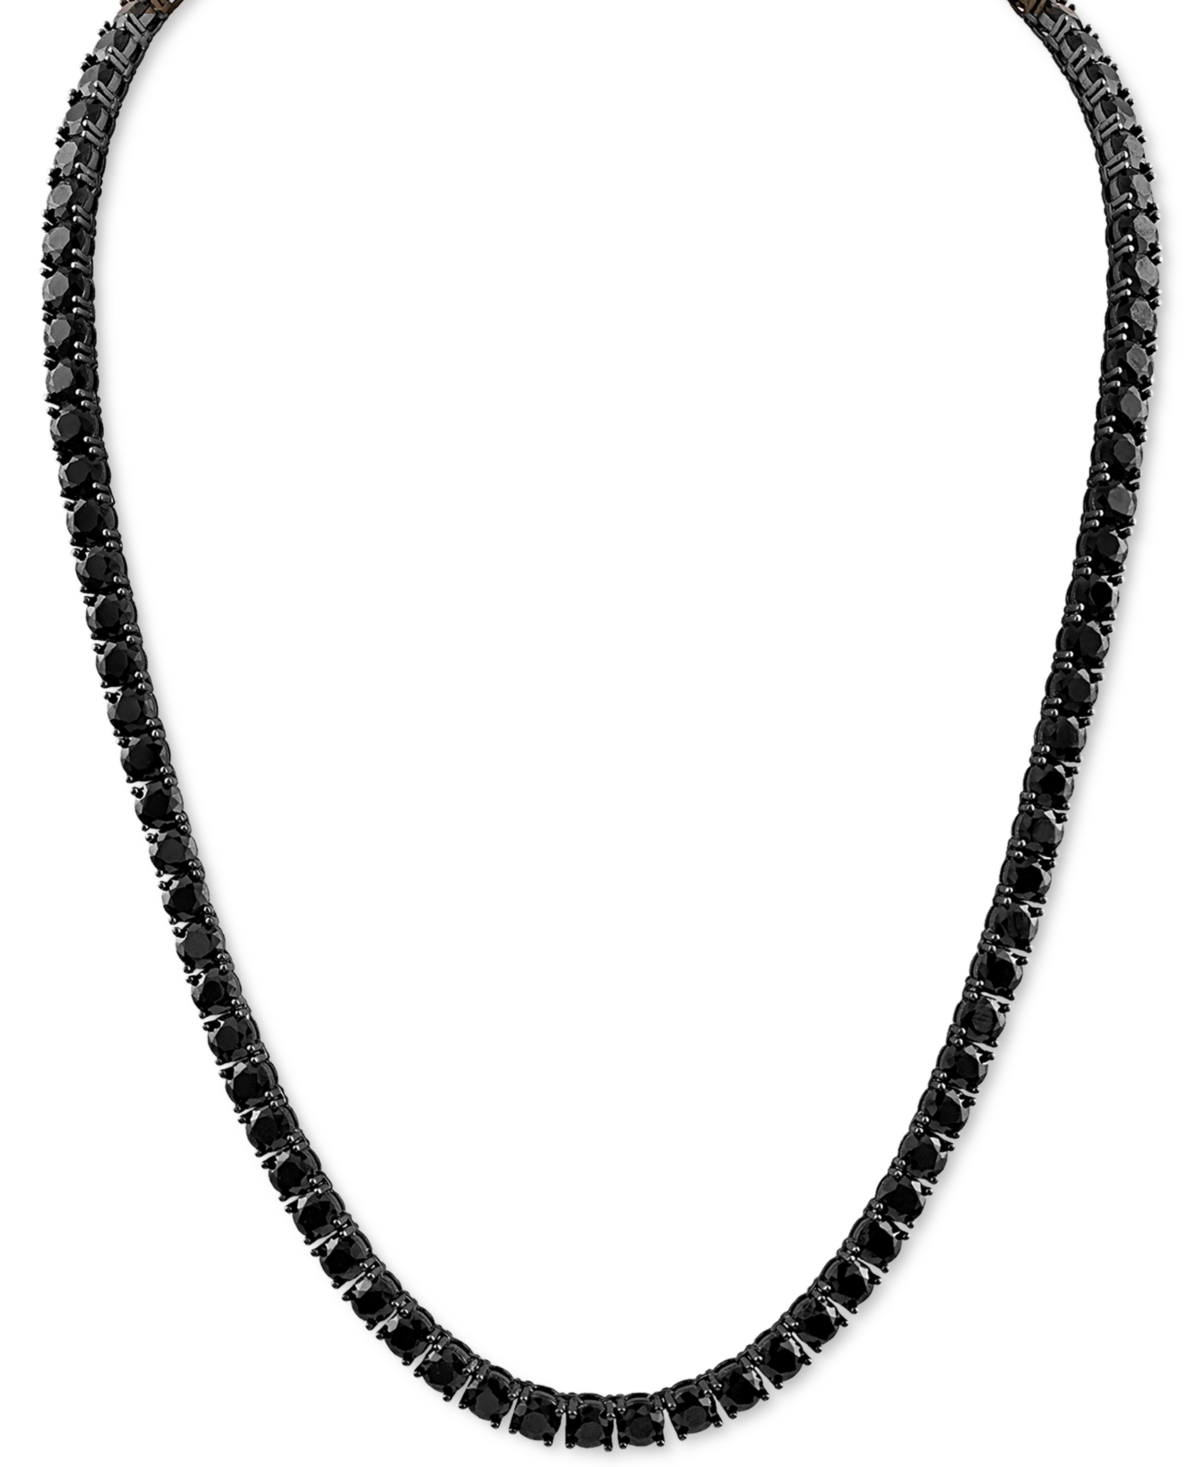 Black Spinel 24" Tennis Necklace in Black Ruthenium-Plated Sterling Silver, Created for Macy's - Black